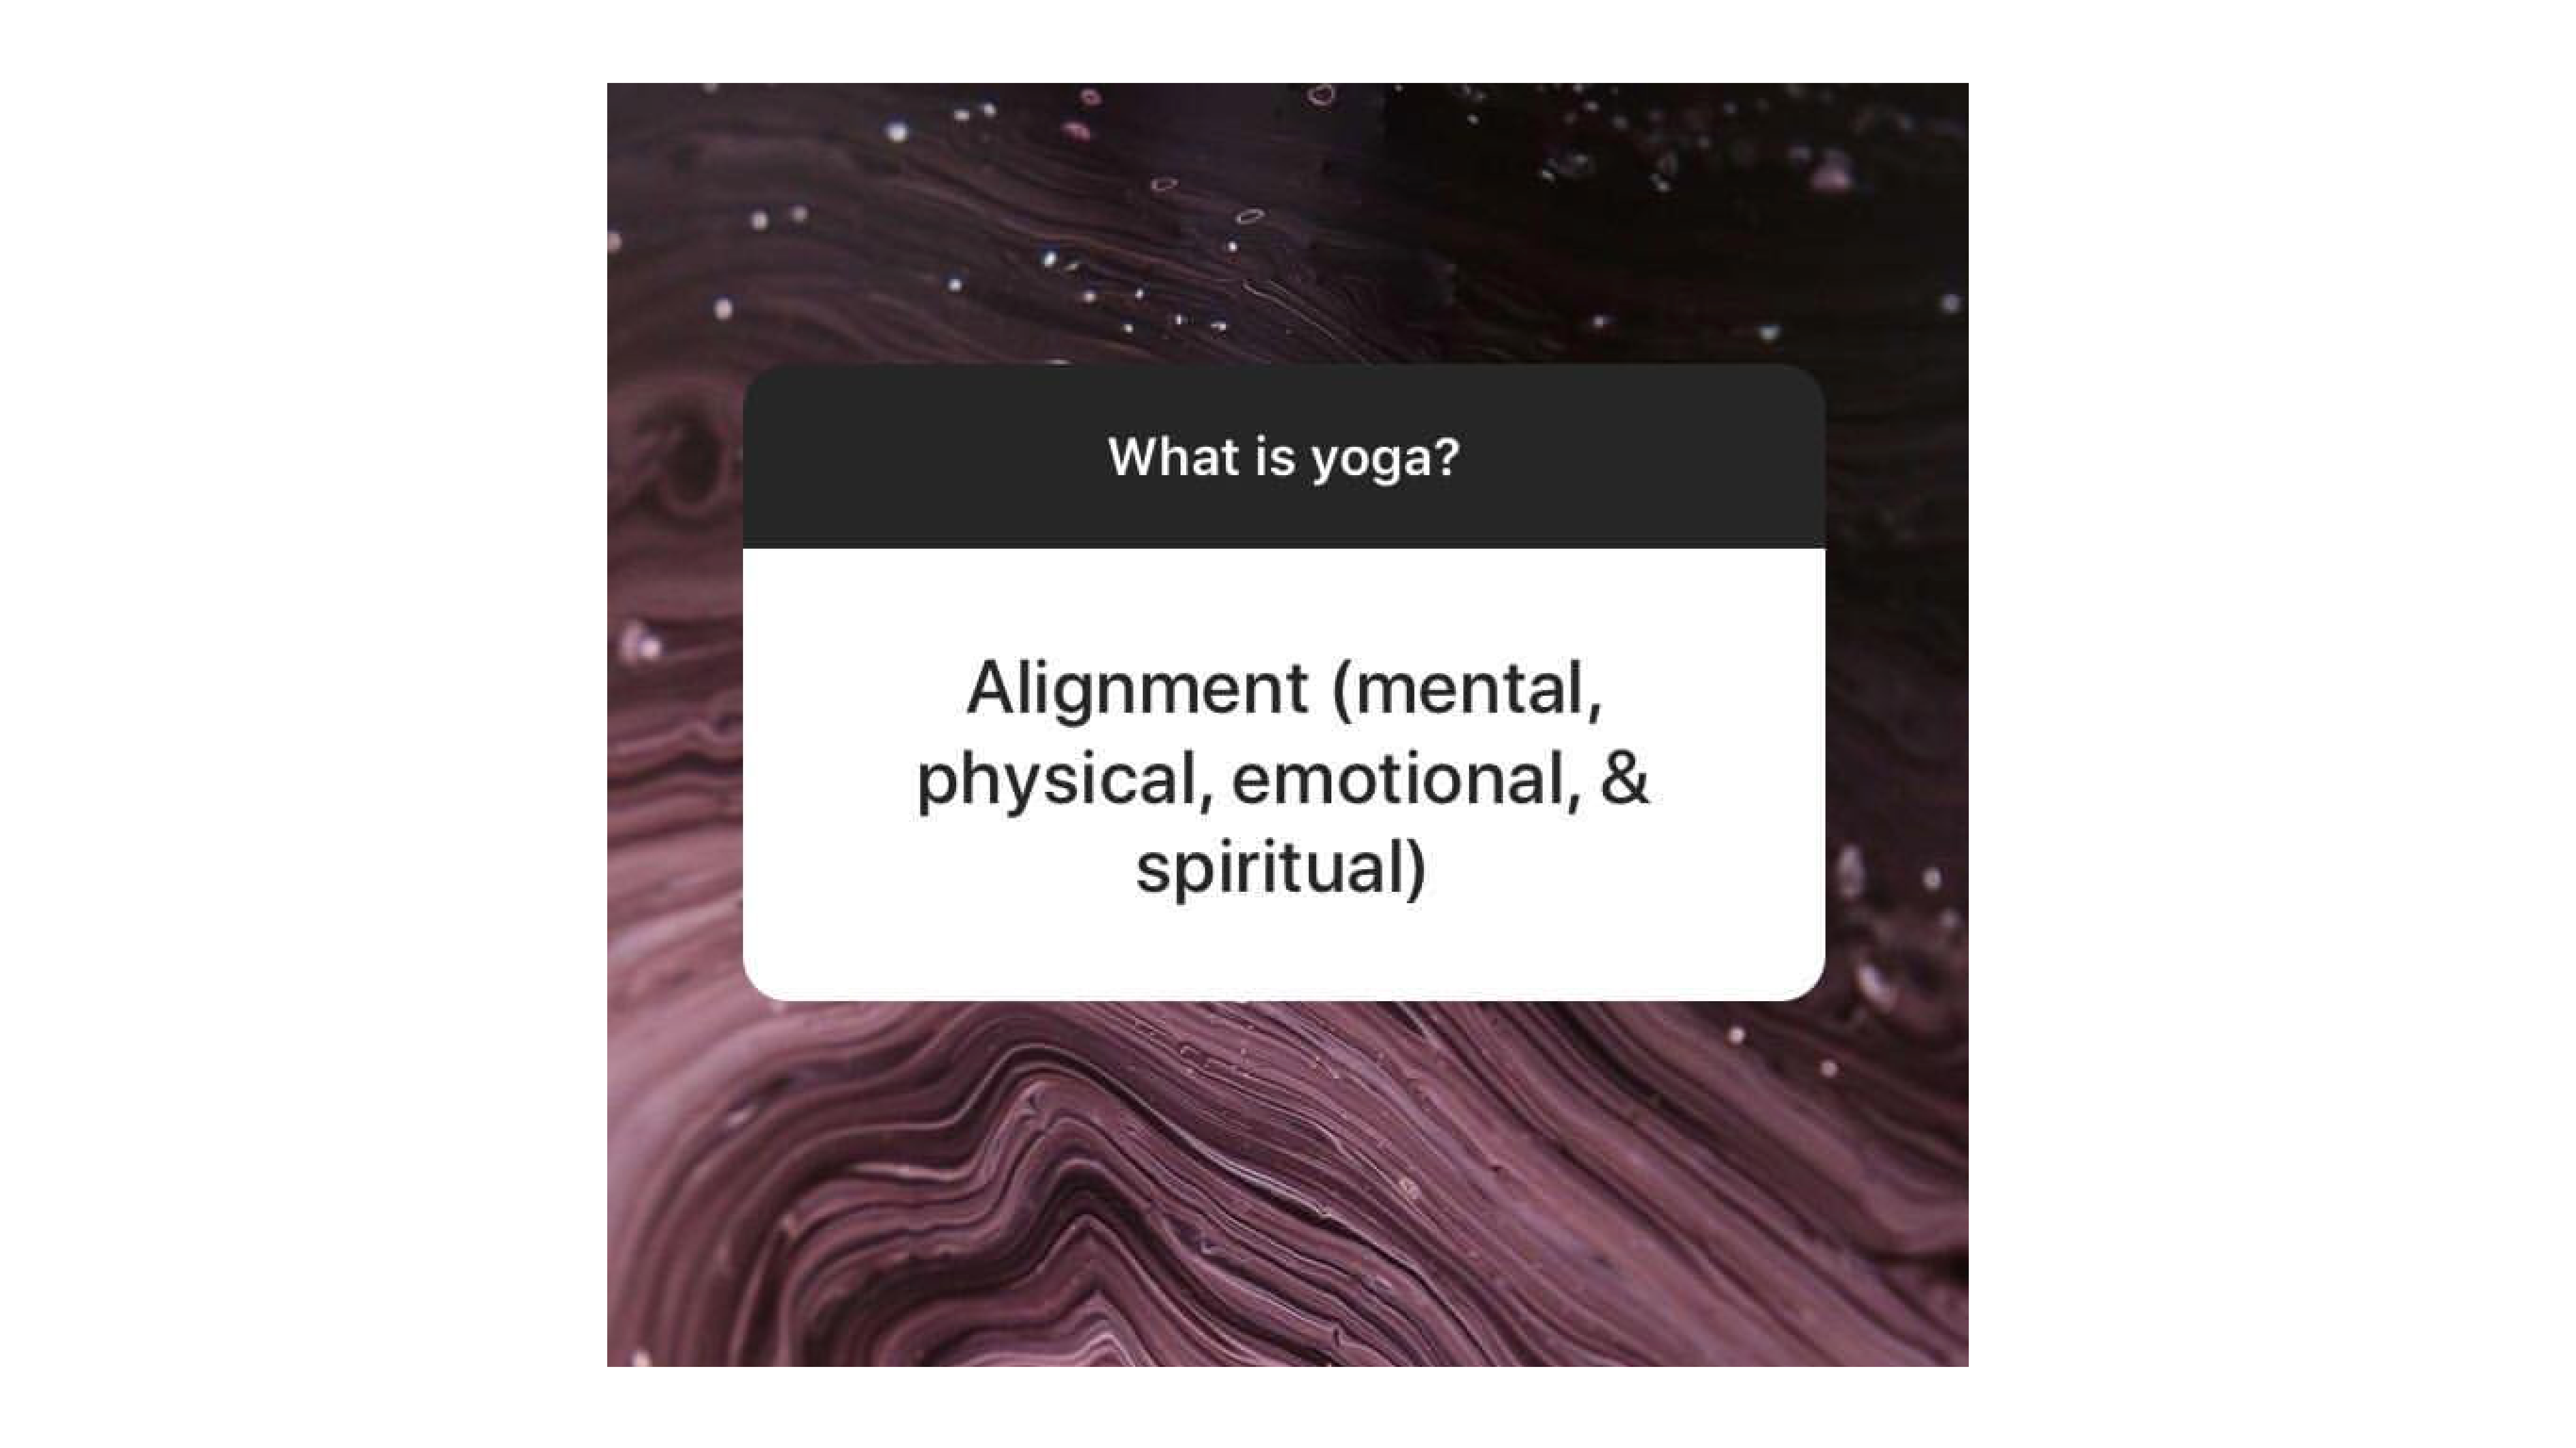 Text reads &quot;What is Yoga&quot; and &quot;Alignment (mental, emotional, physical and spiritual&quot; over an abstract background